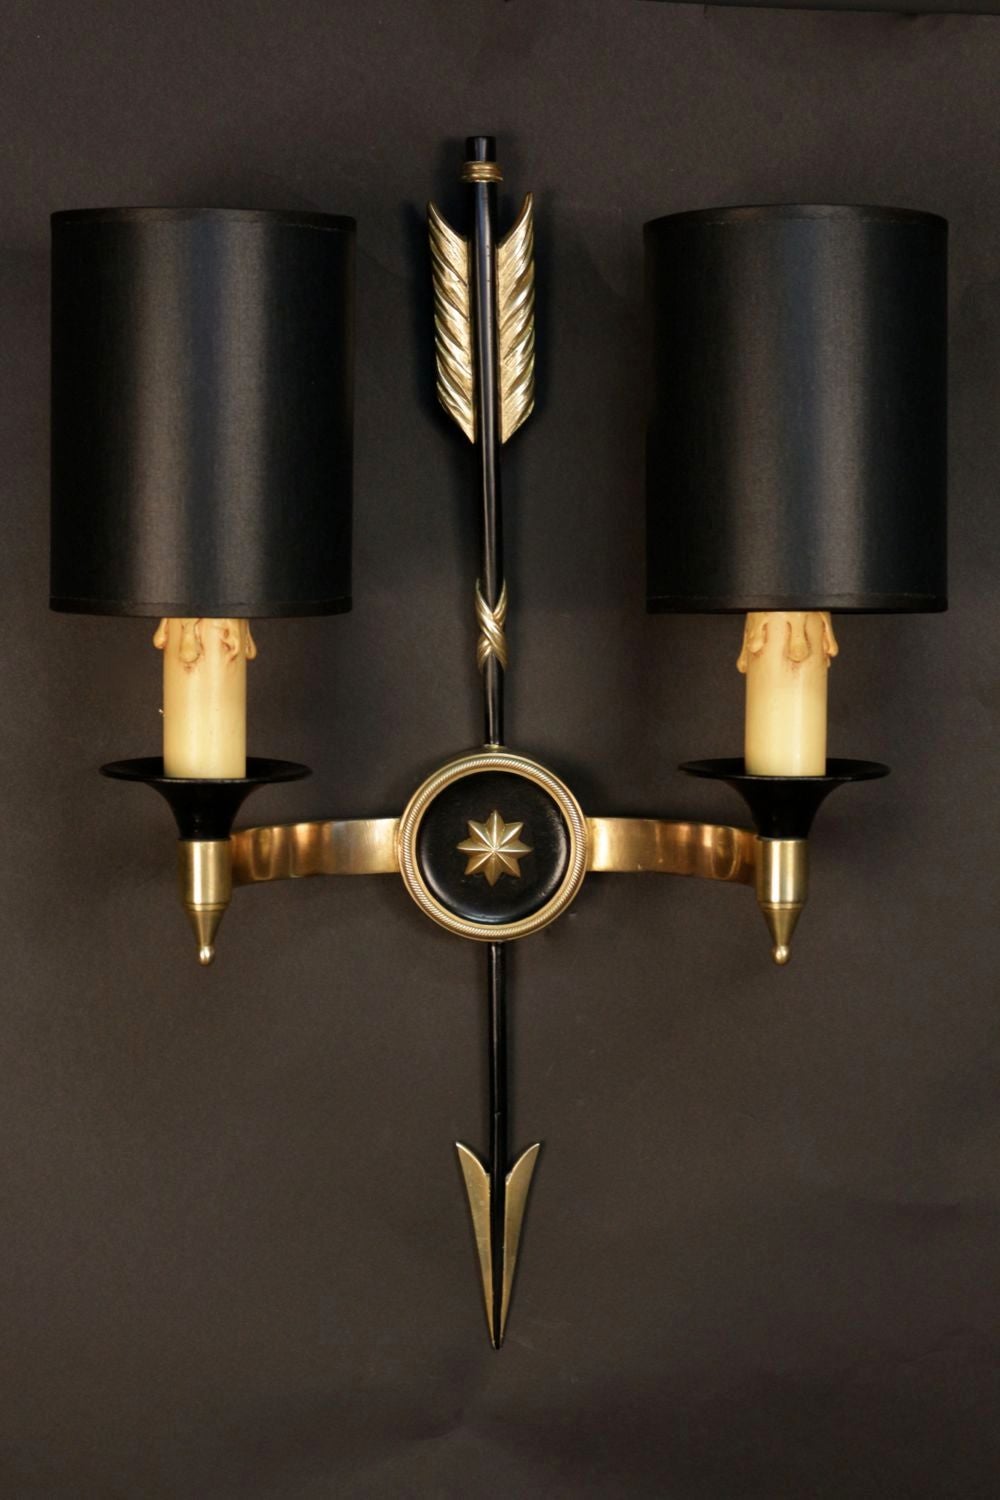 Pair of 1950s 'Arrow' neoclassical sconces by Maison Arlus. Gilded and blackened brass. Decorated with an arrow adorned with a two stars medallion. Two lighted arms per sconce and new tailored black lamp shade with gilded inside.